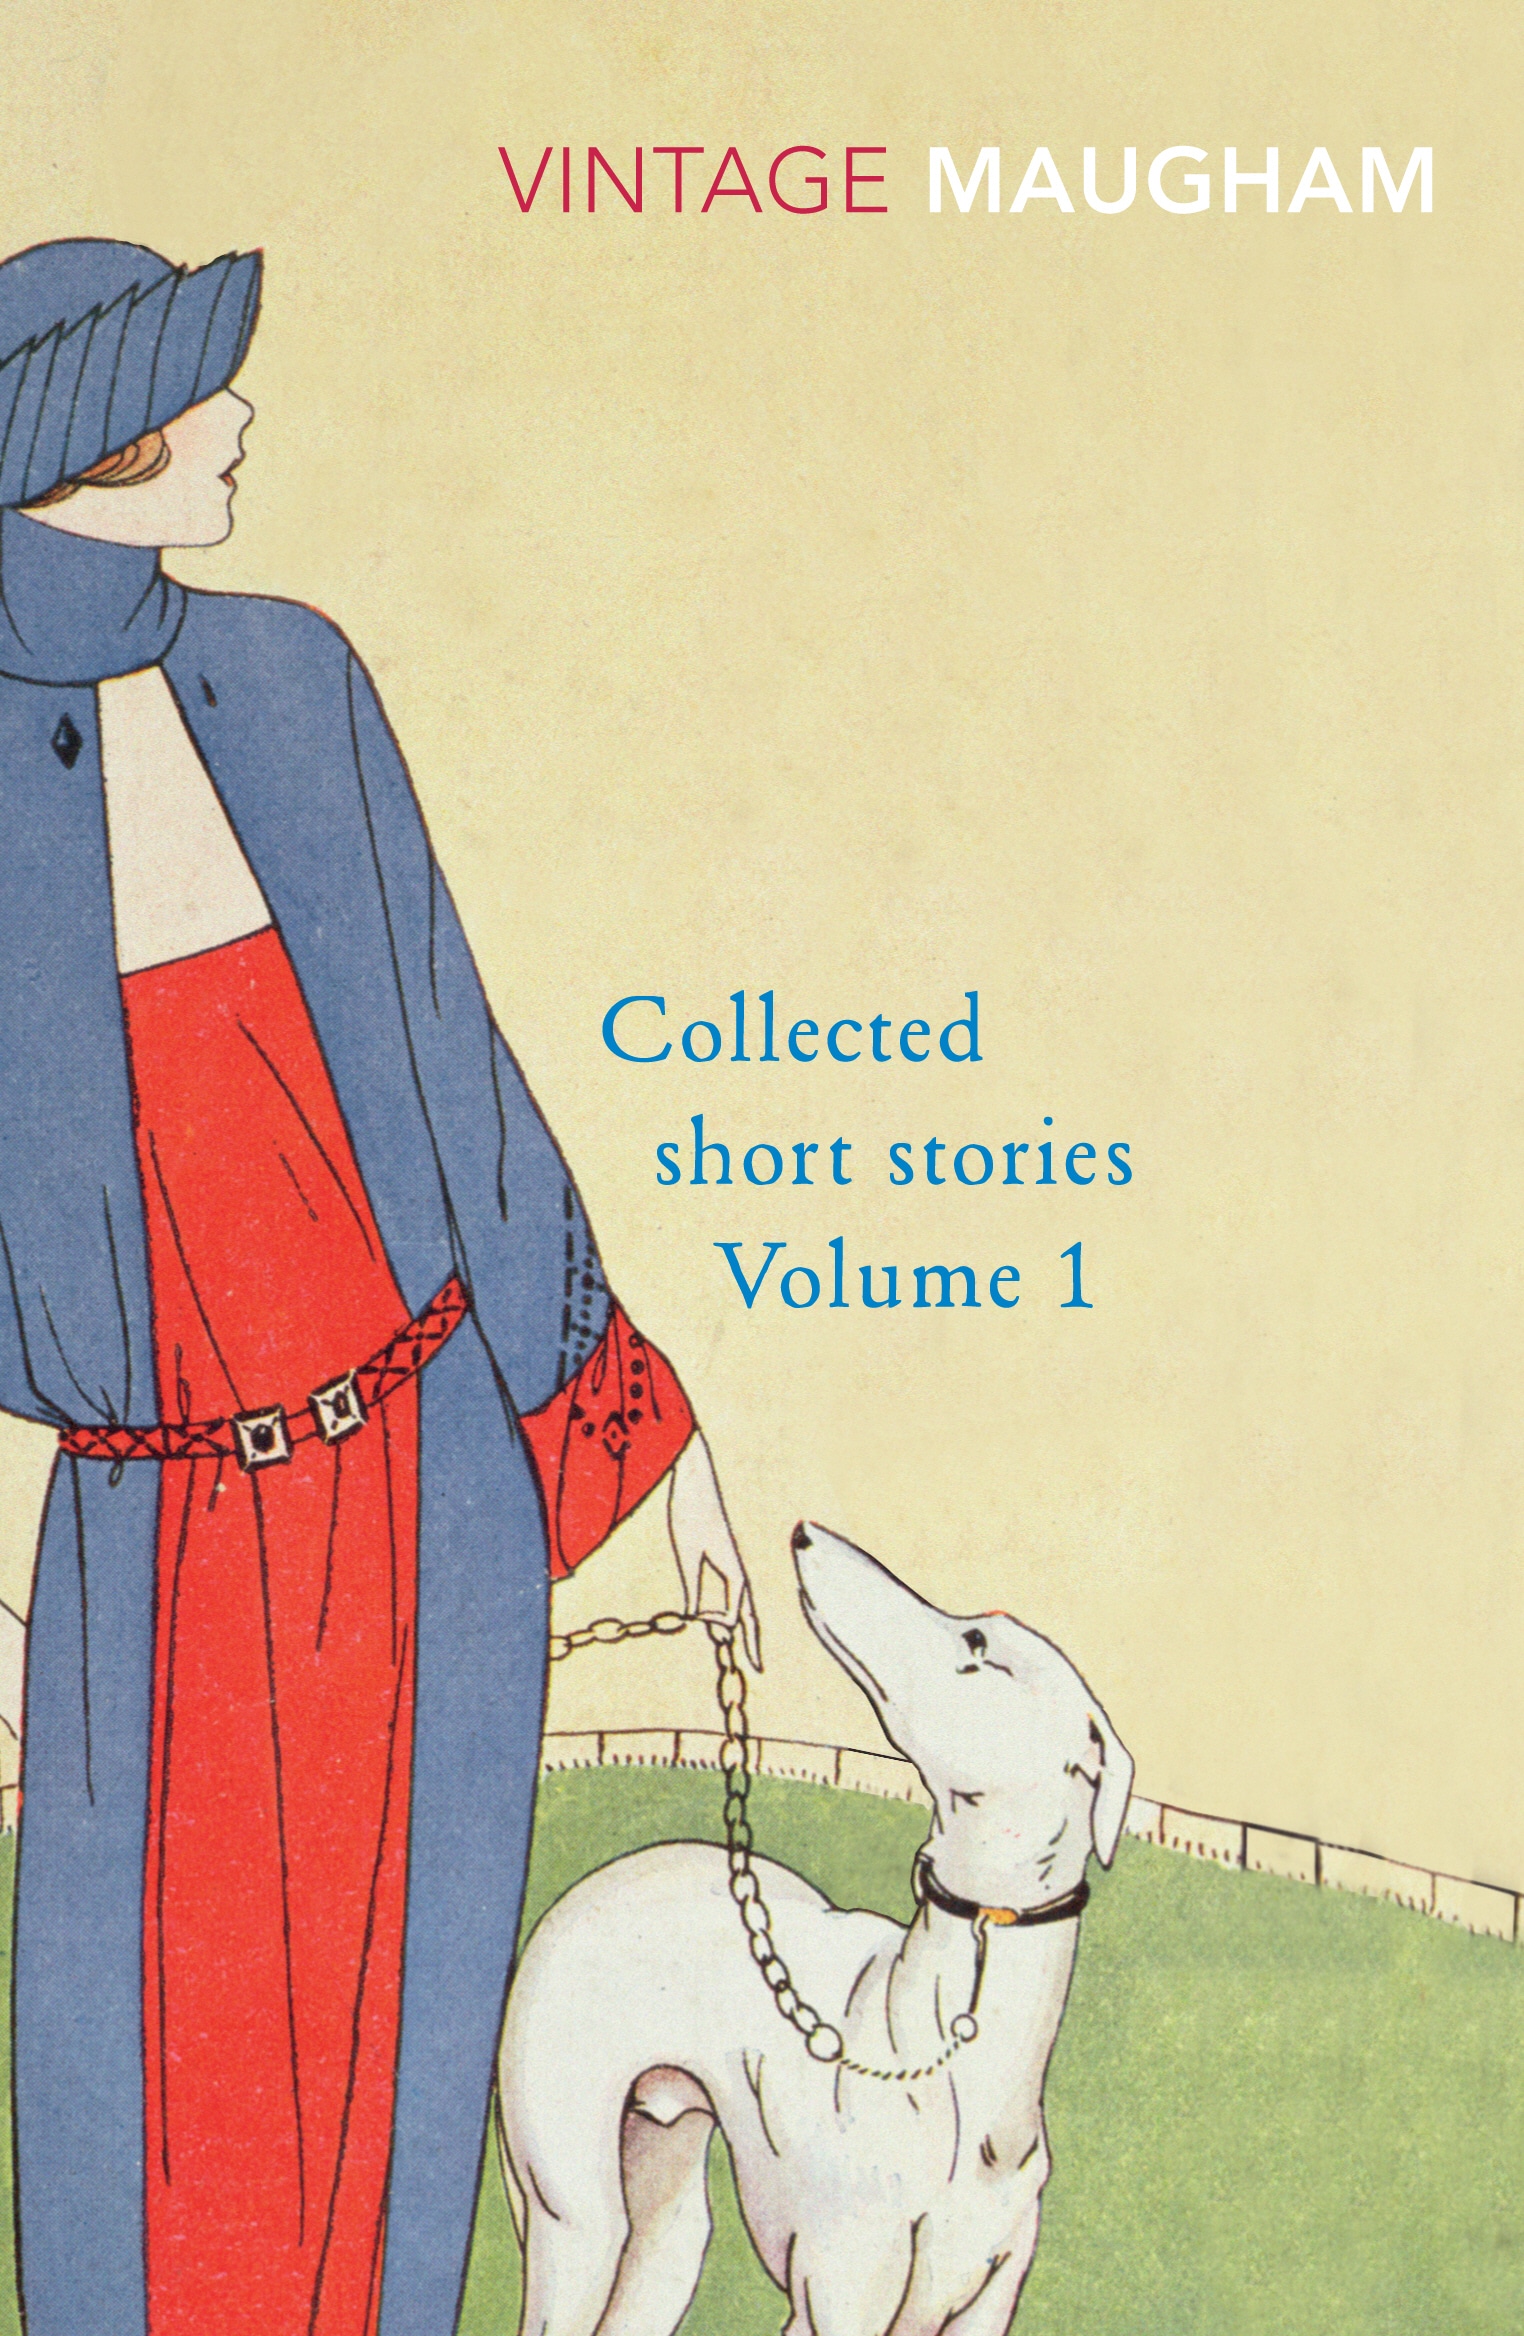 Book “Collected Short Stories Volume 1” by W. Somerset Maugham — December 7, 2000